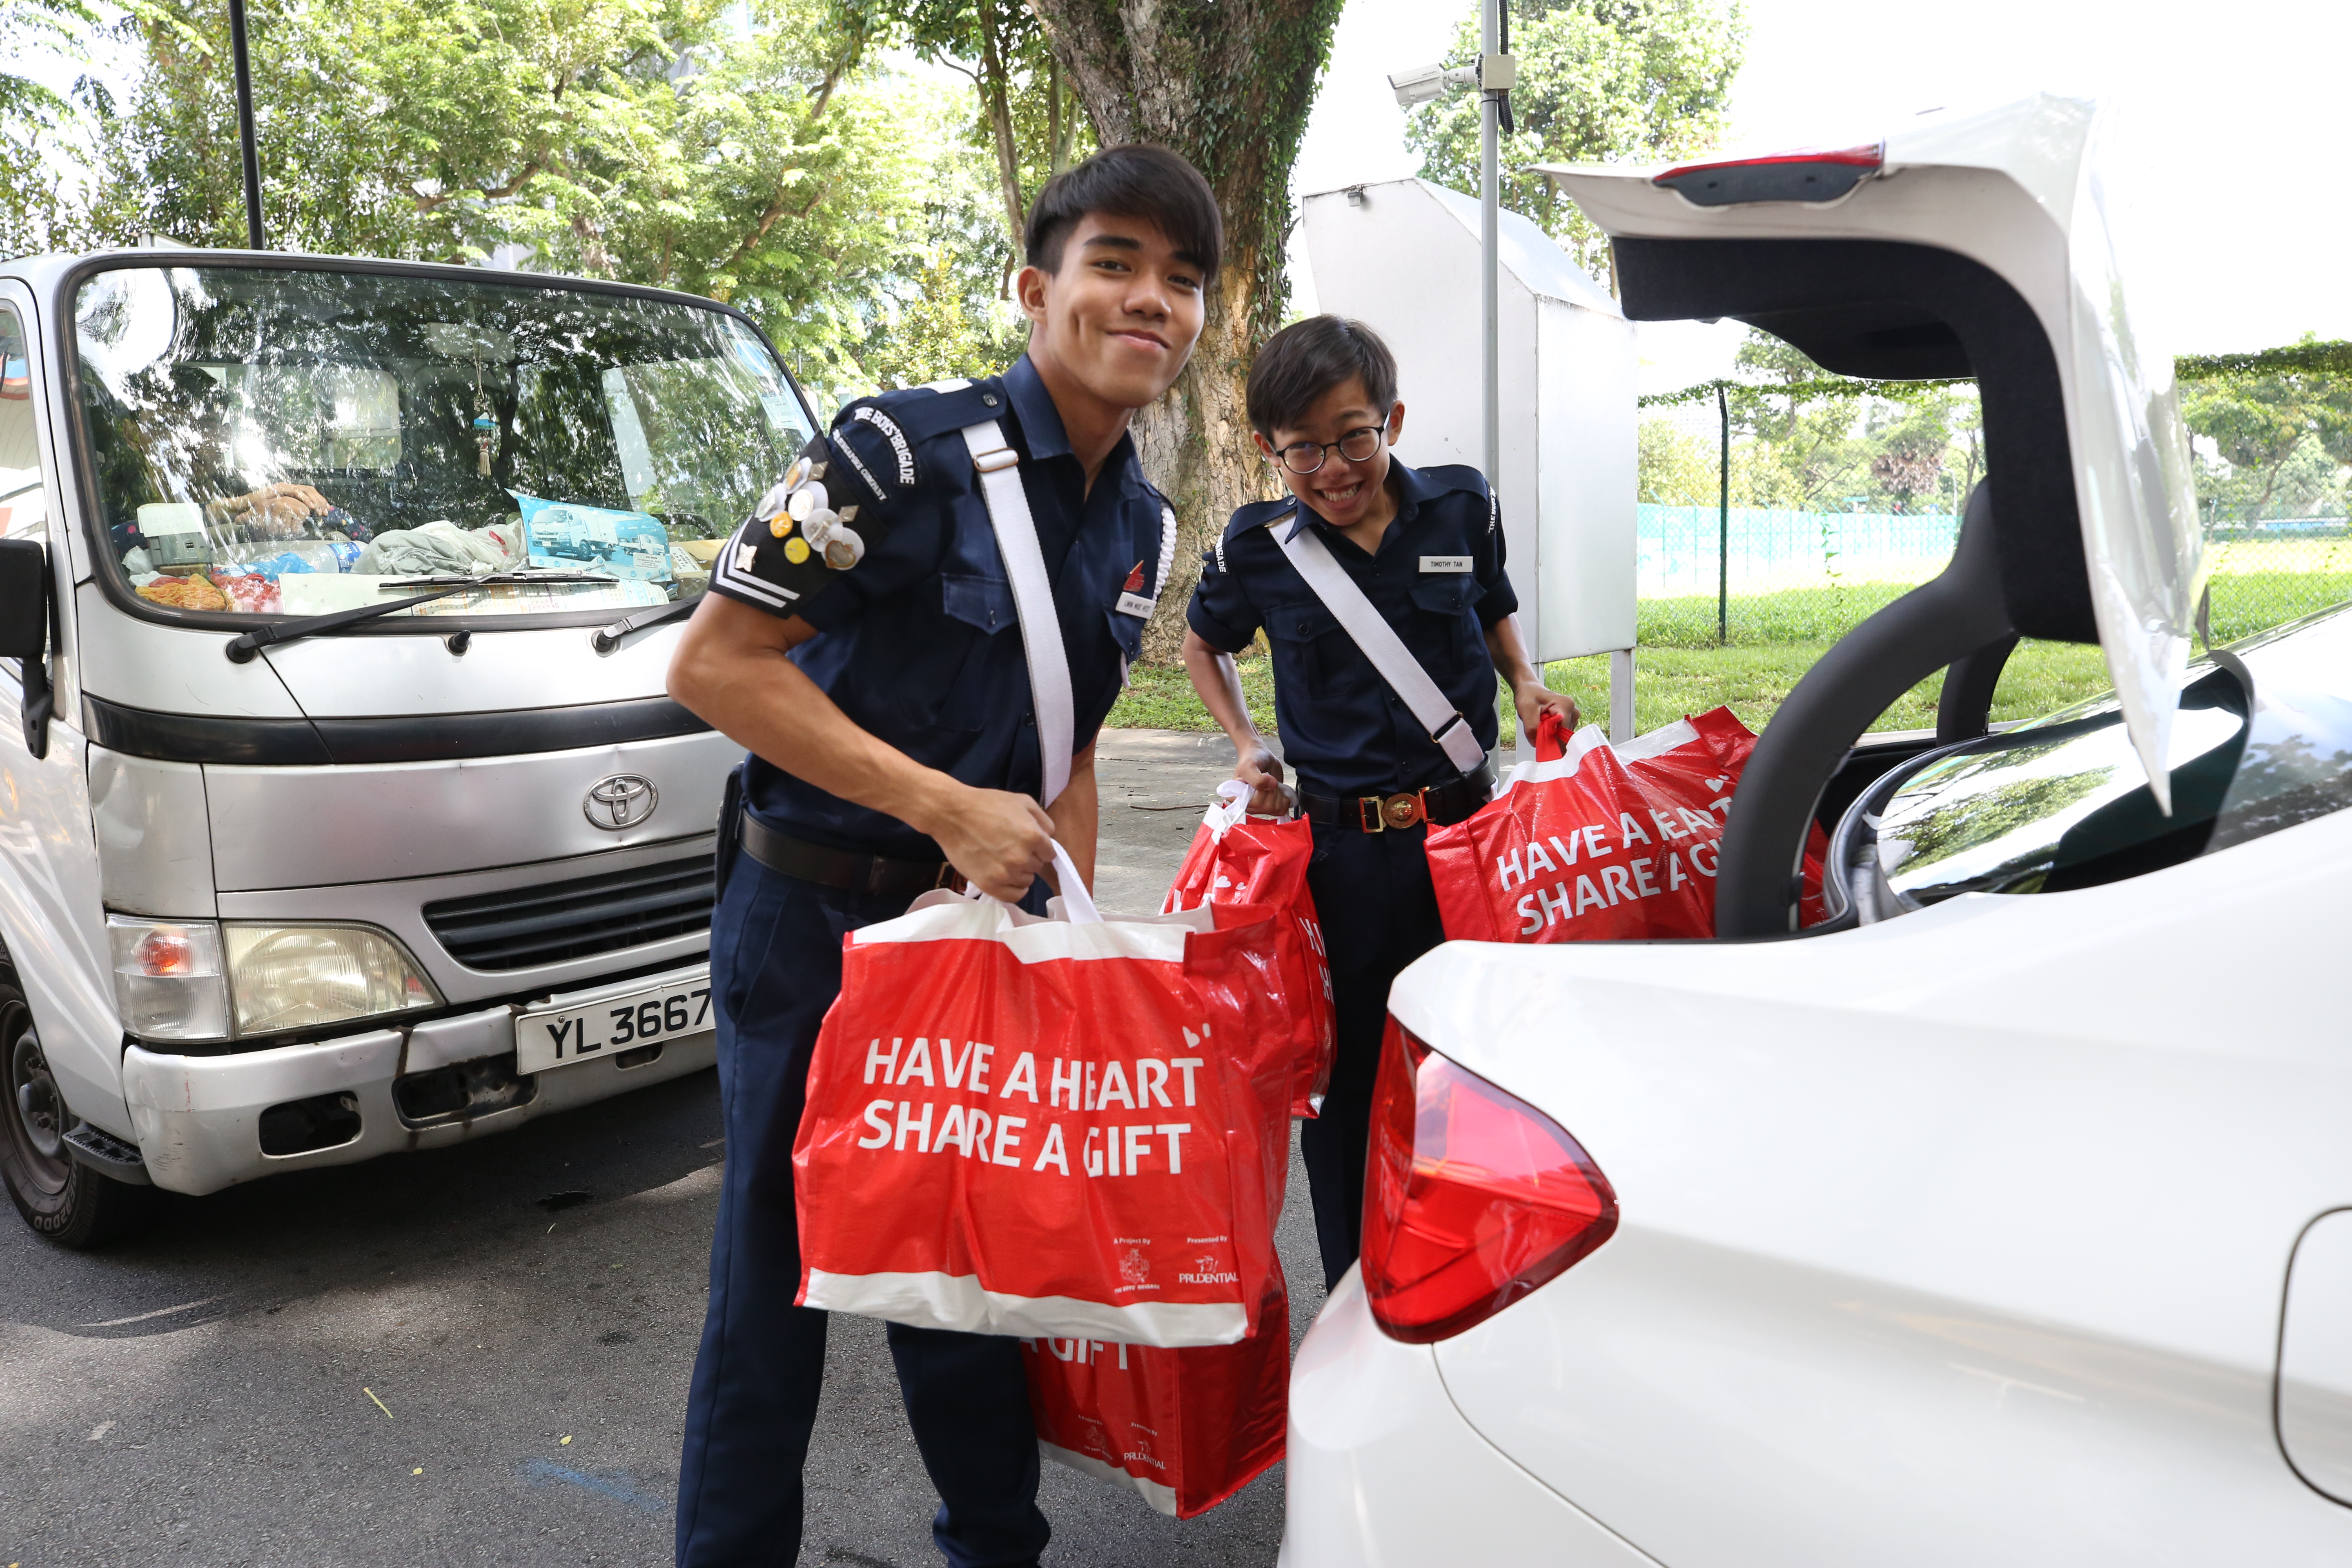 Share-A-Gift is an annual community service project that promotes the spirit of caring and sharing amongst the local community where Boys’ Brigade members and volunteers collect grocery items and gifts for distribution to the needy.